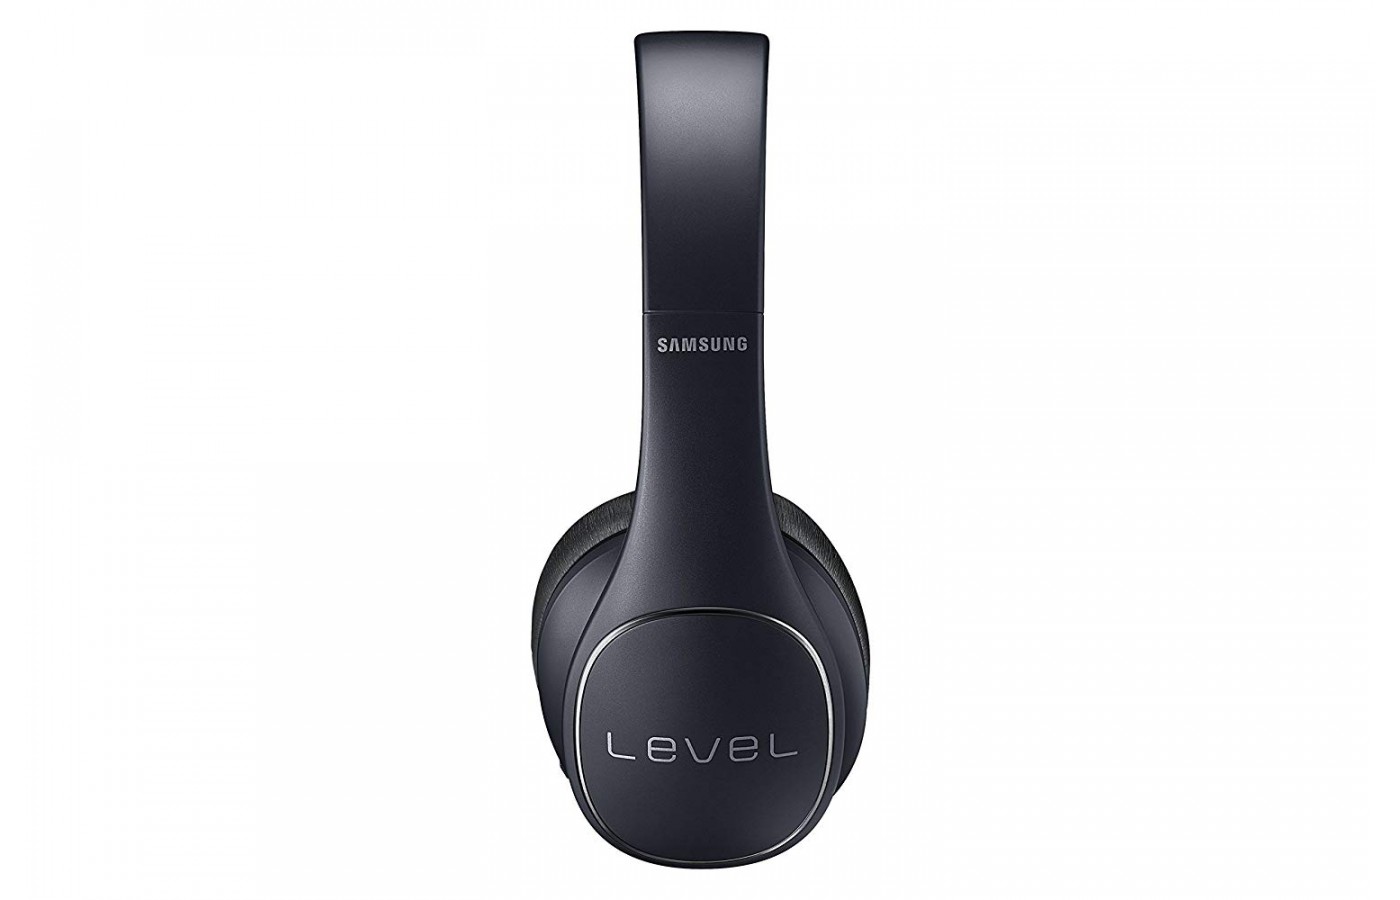 Level On offers full advanced noise cancelation that can be turned on and off.